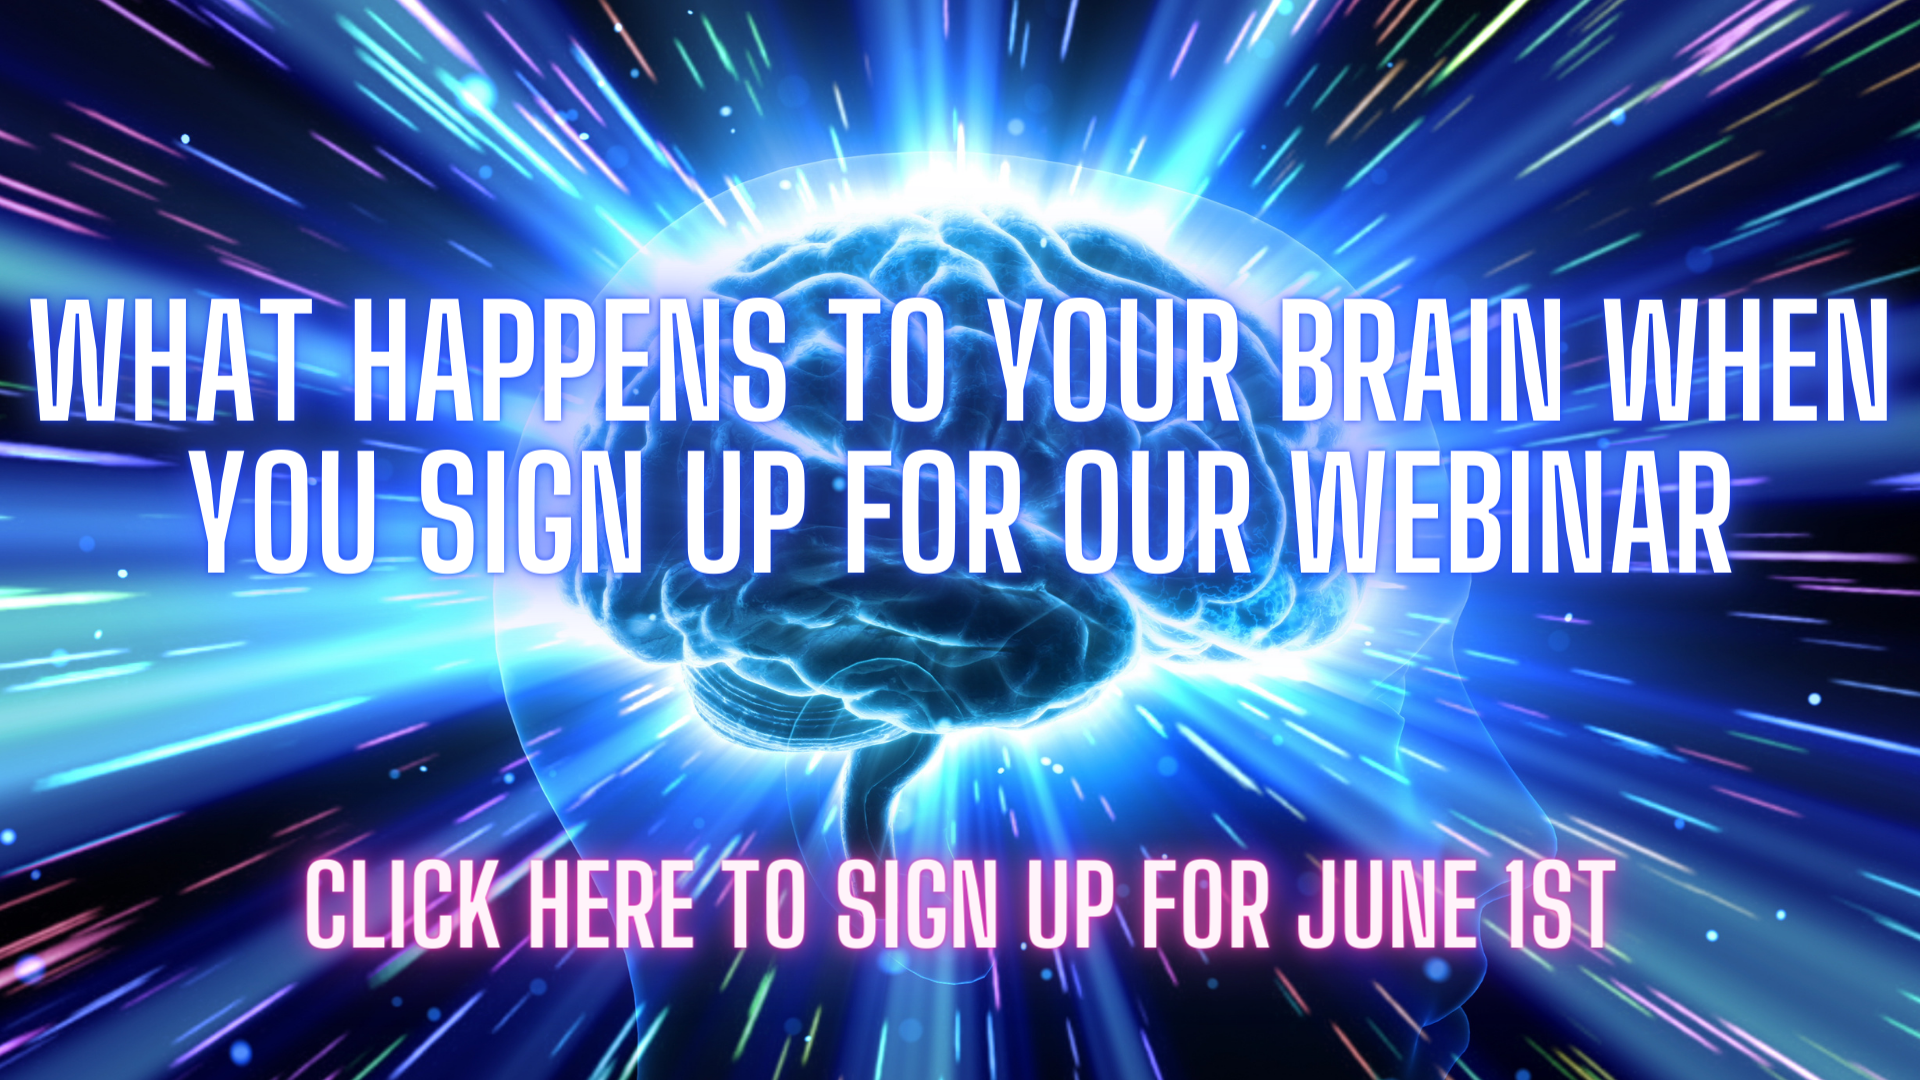 Your brain when you come to our webinar